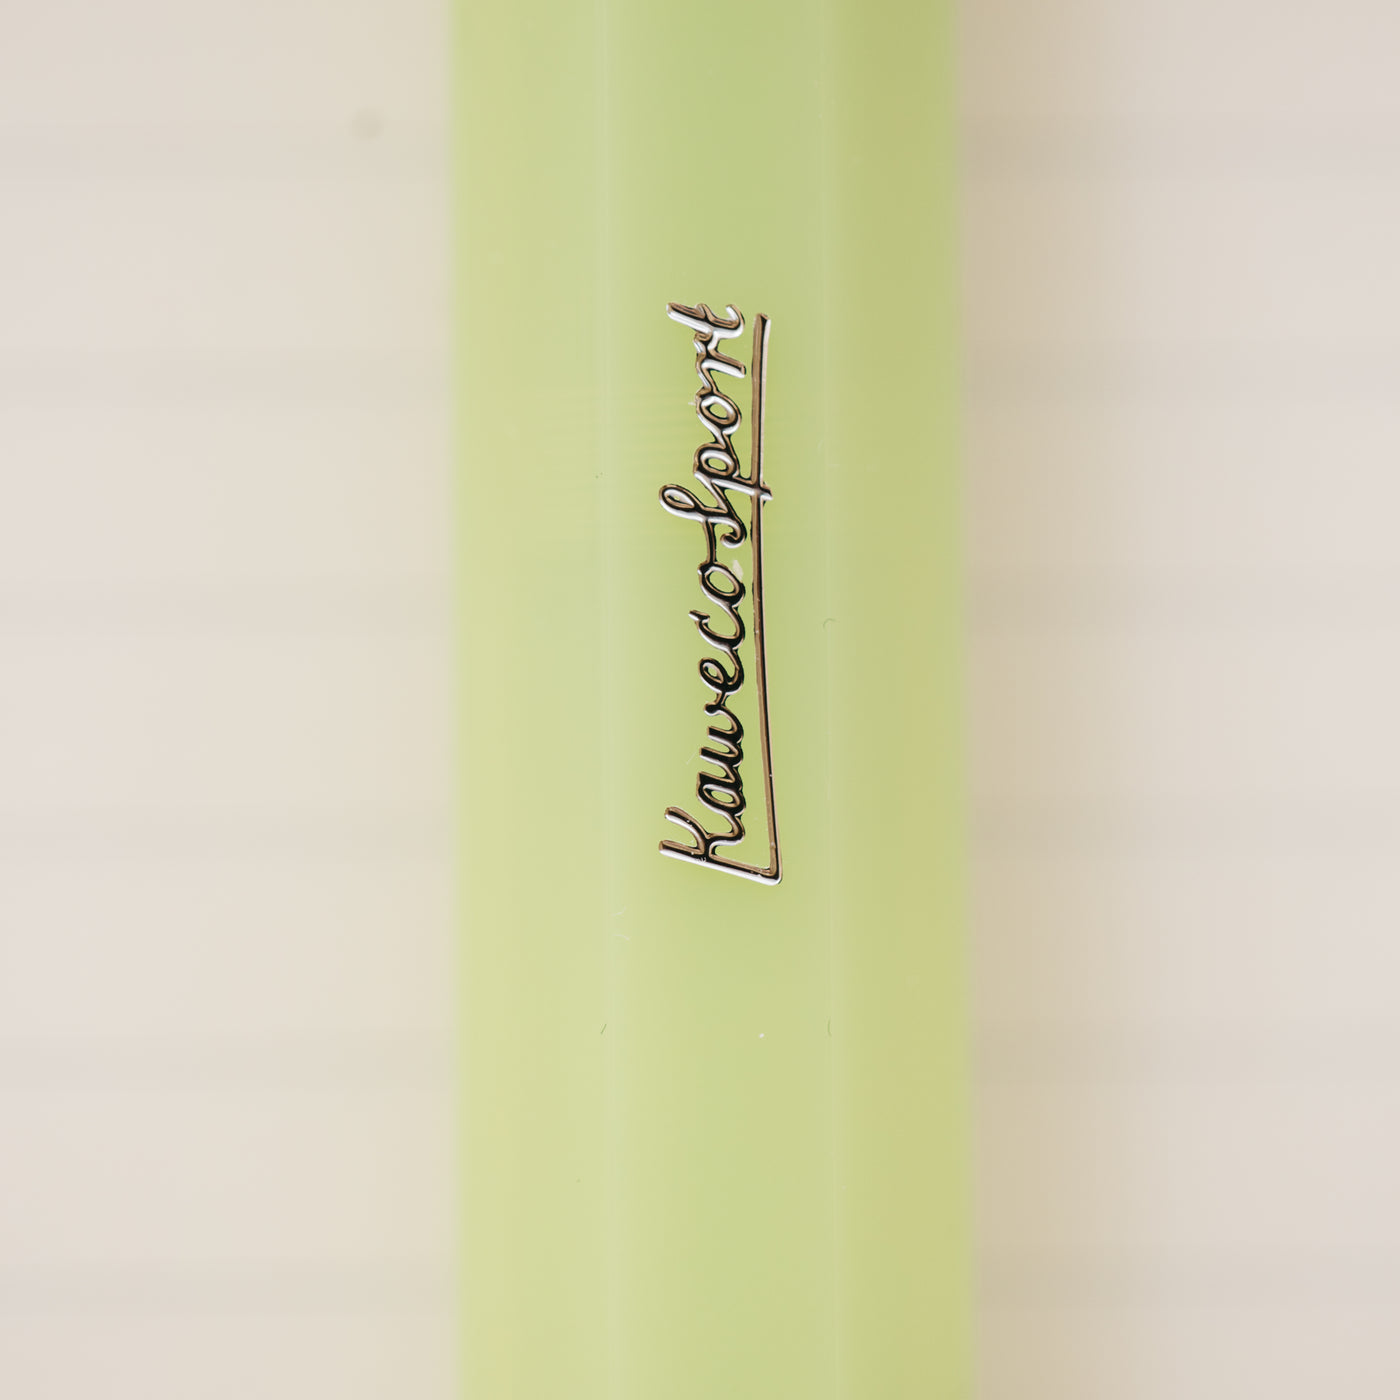 Kaweco Frosted Sport Lime Fountain Pen